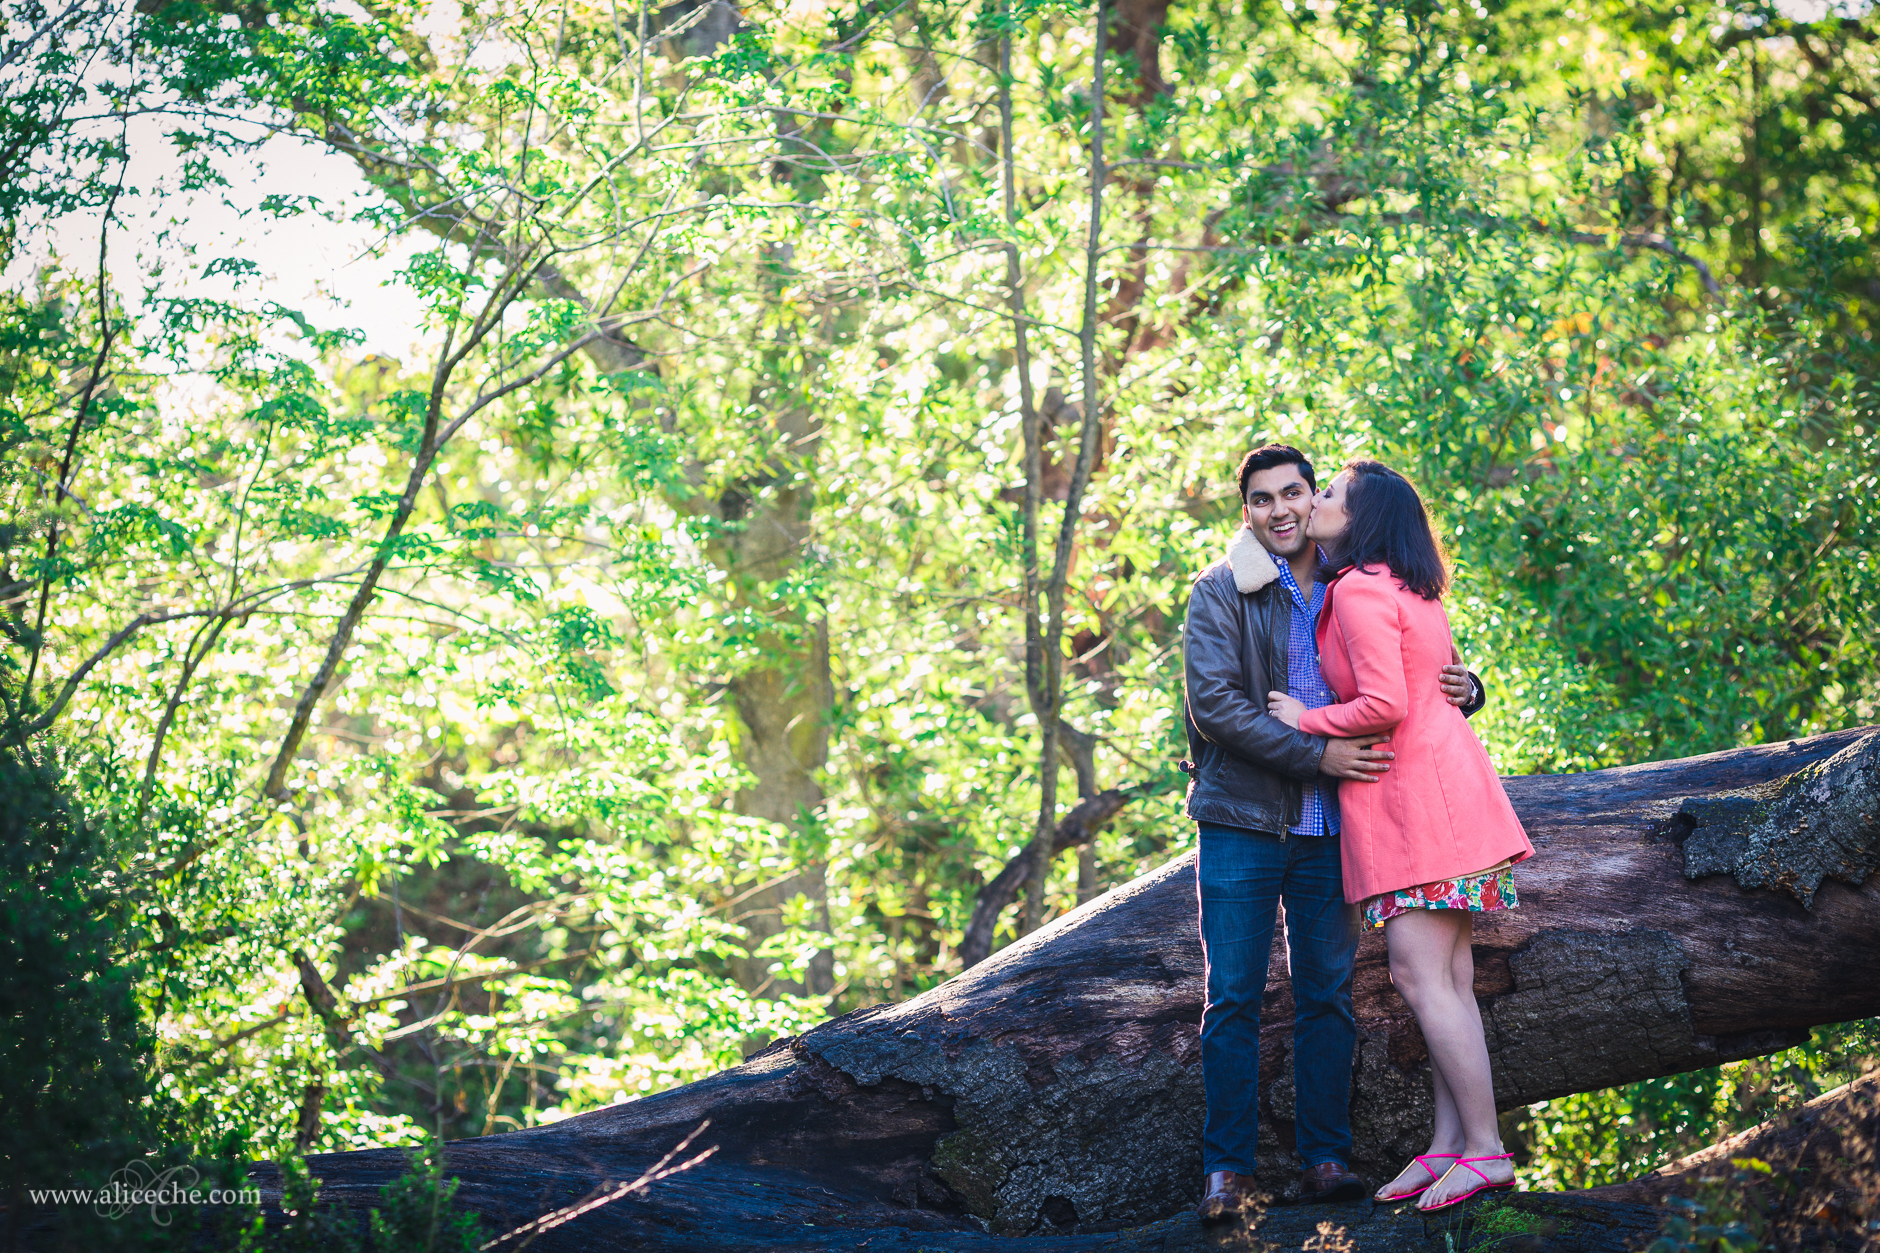 windy-hill-engagement-palo-alto-bay-area-girl-kissing-fiance-on-cheek-standing-on-a-tree